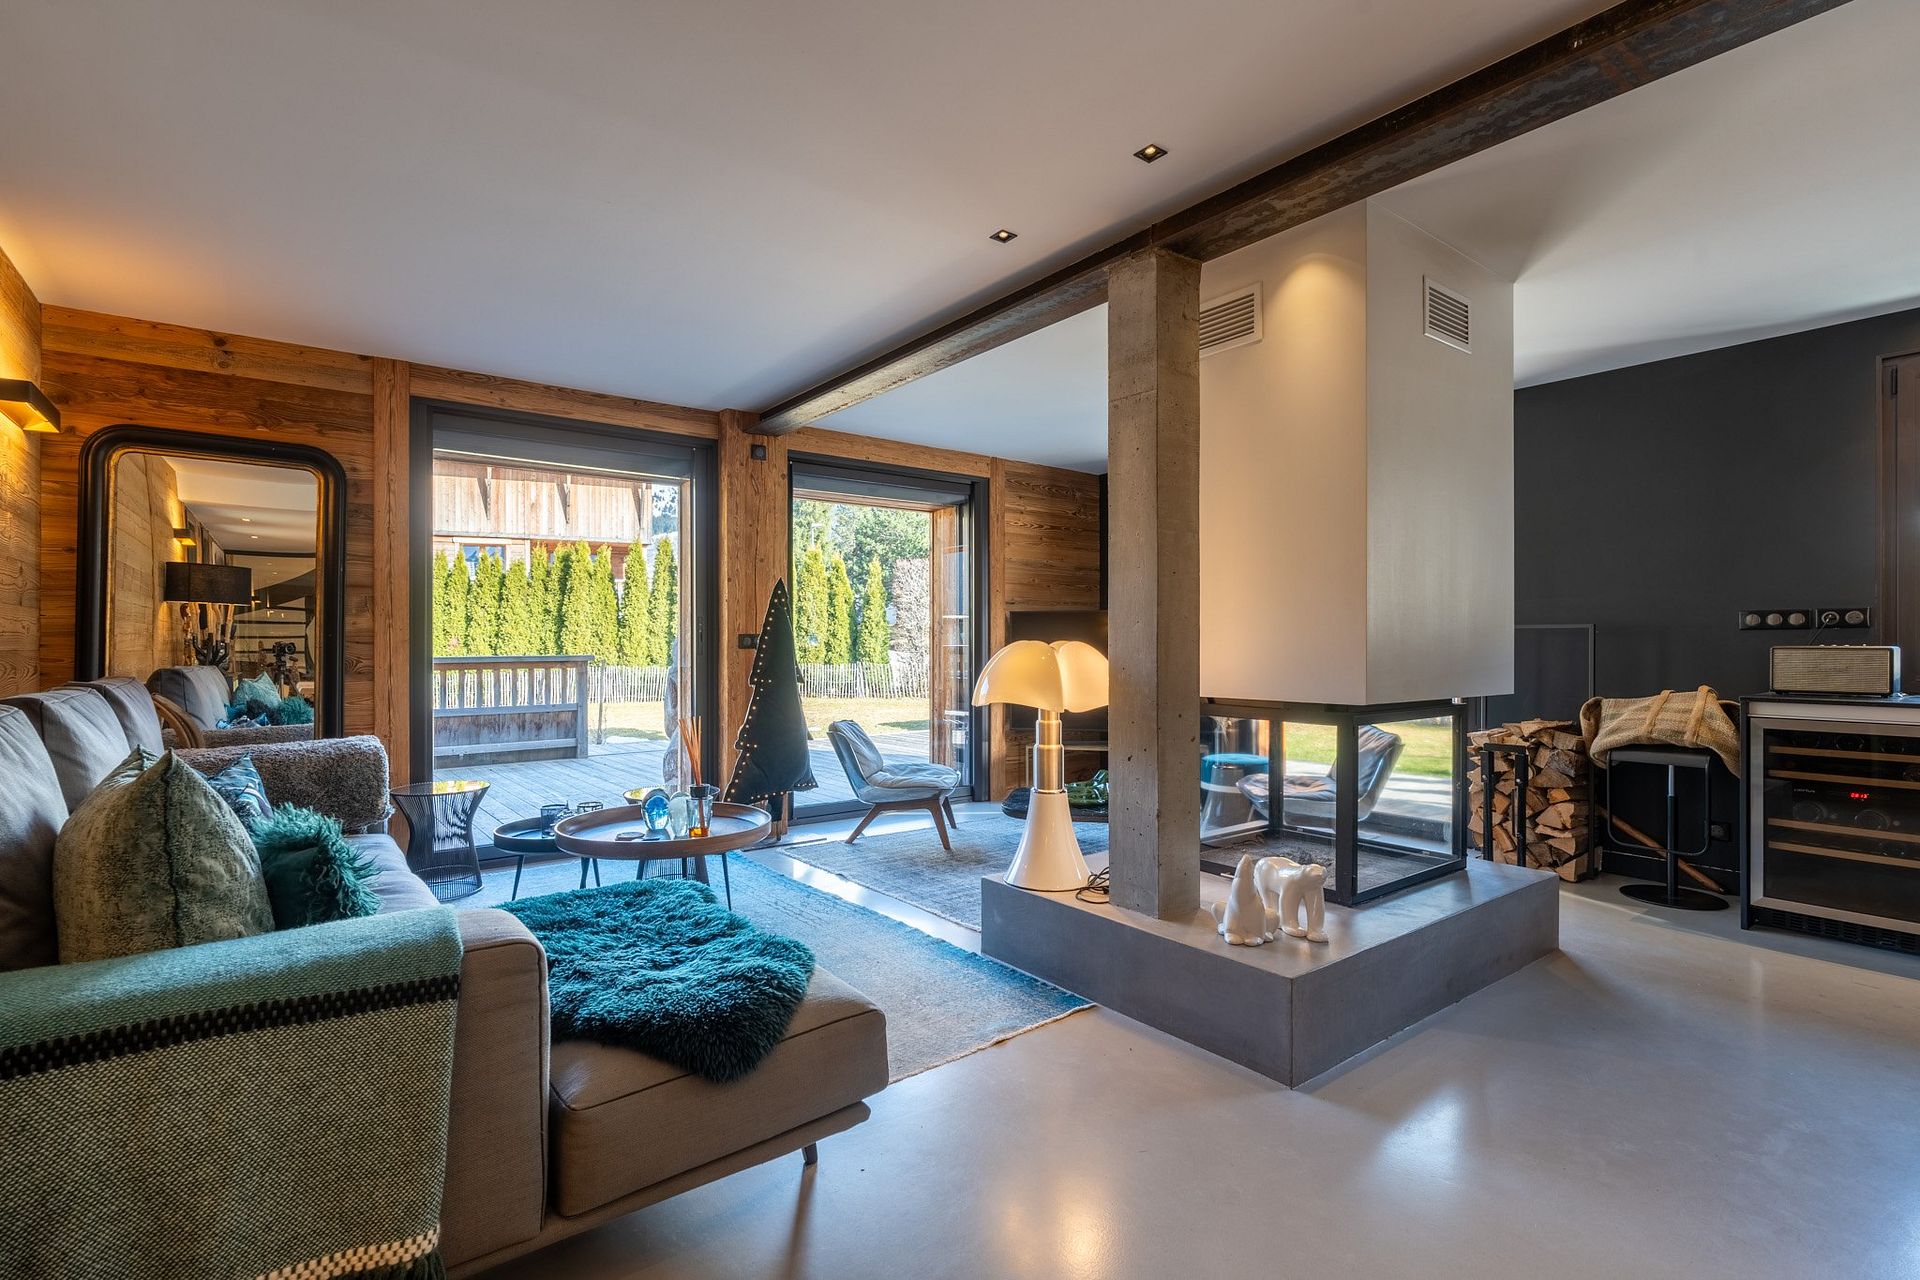 8 bed Chalet For Sale in Les Aravis, French Alps